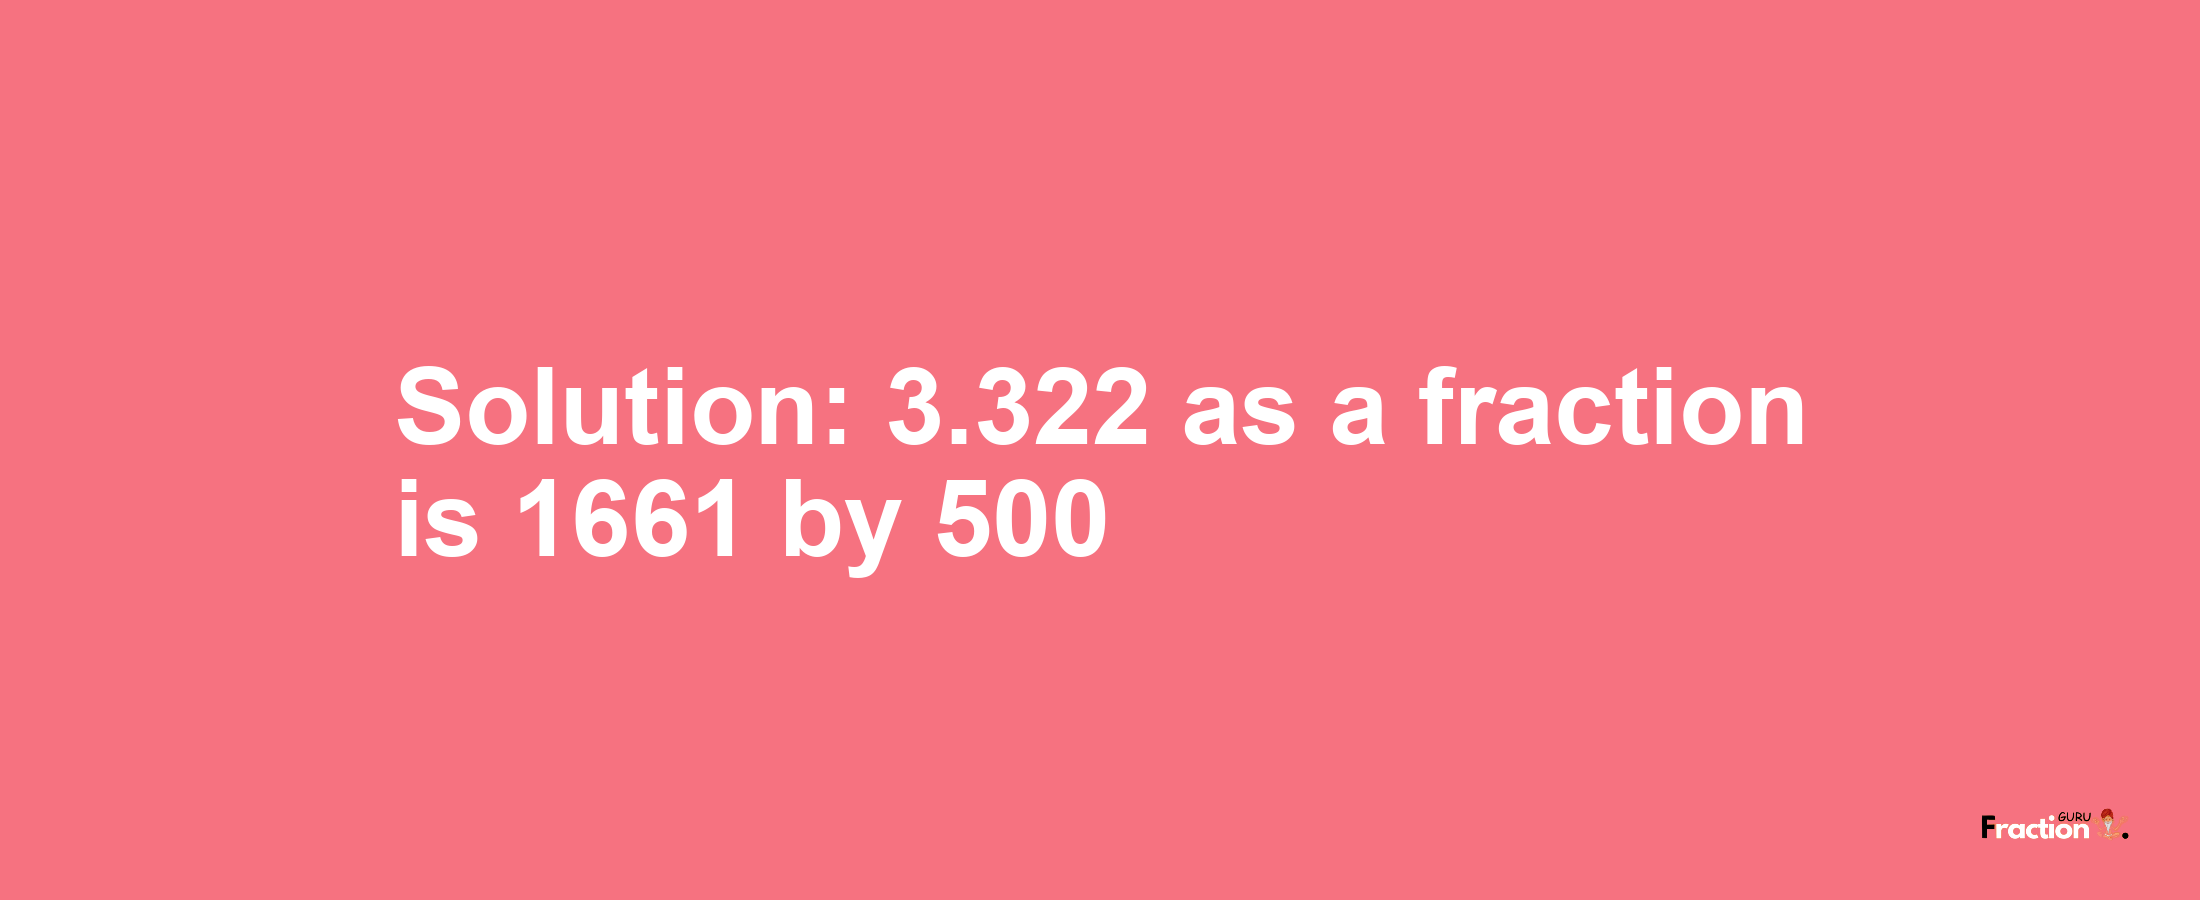 Solution:3.322 as a fraction is 1661/500